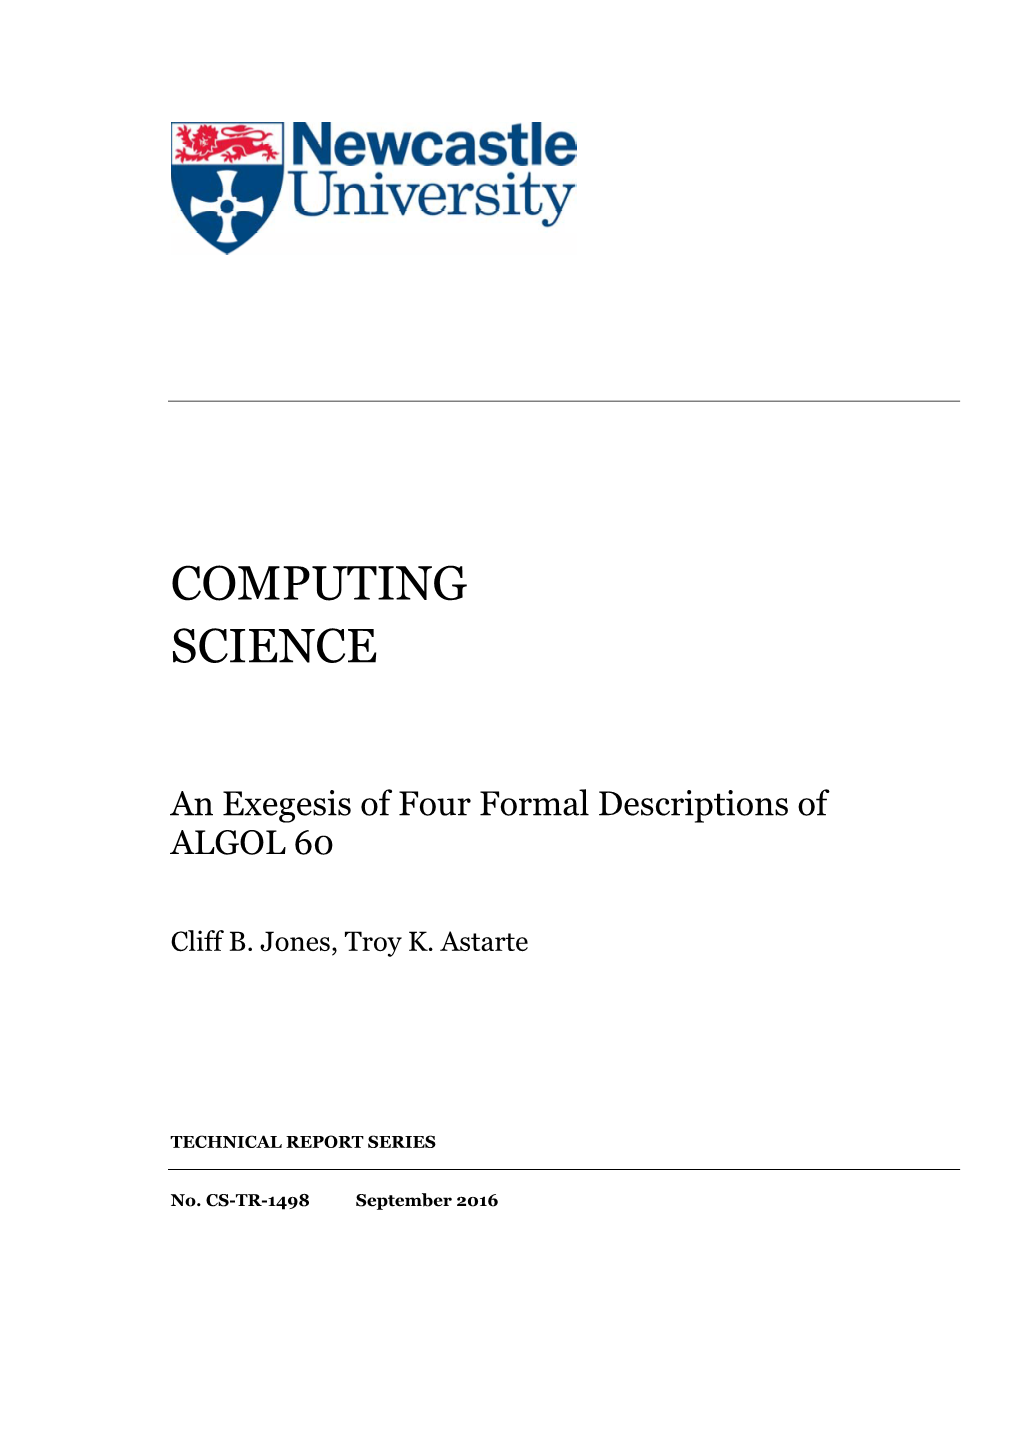 An Exegesis of Four Formal Descriptions of ALGOL 60